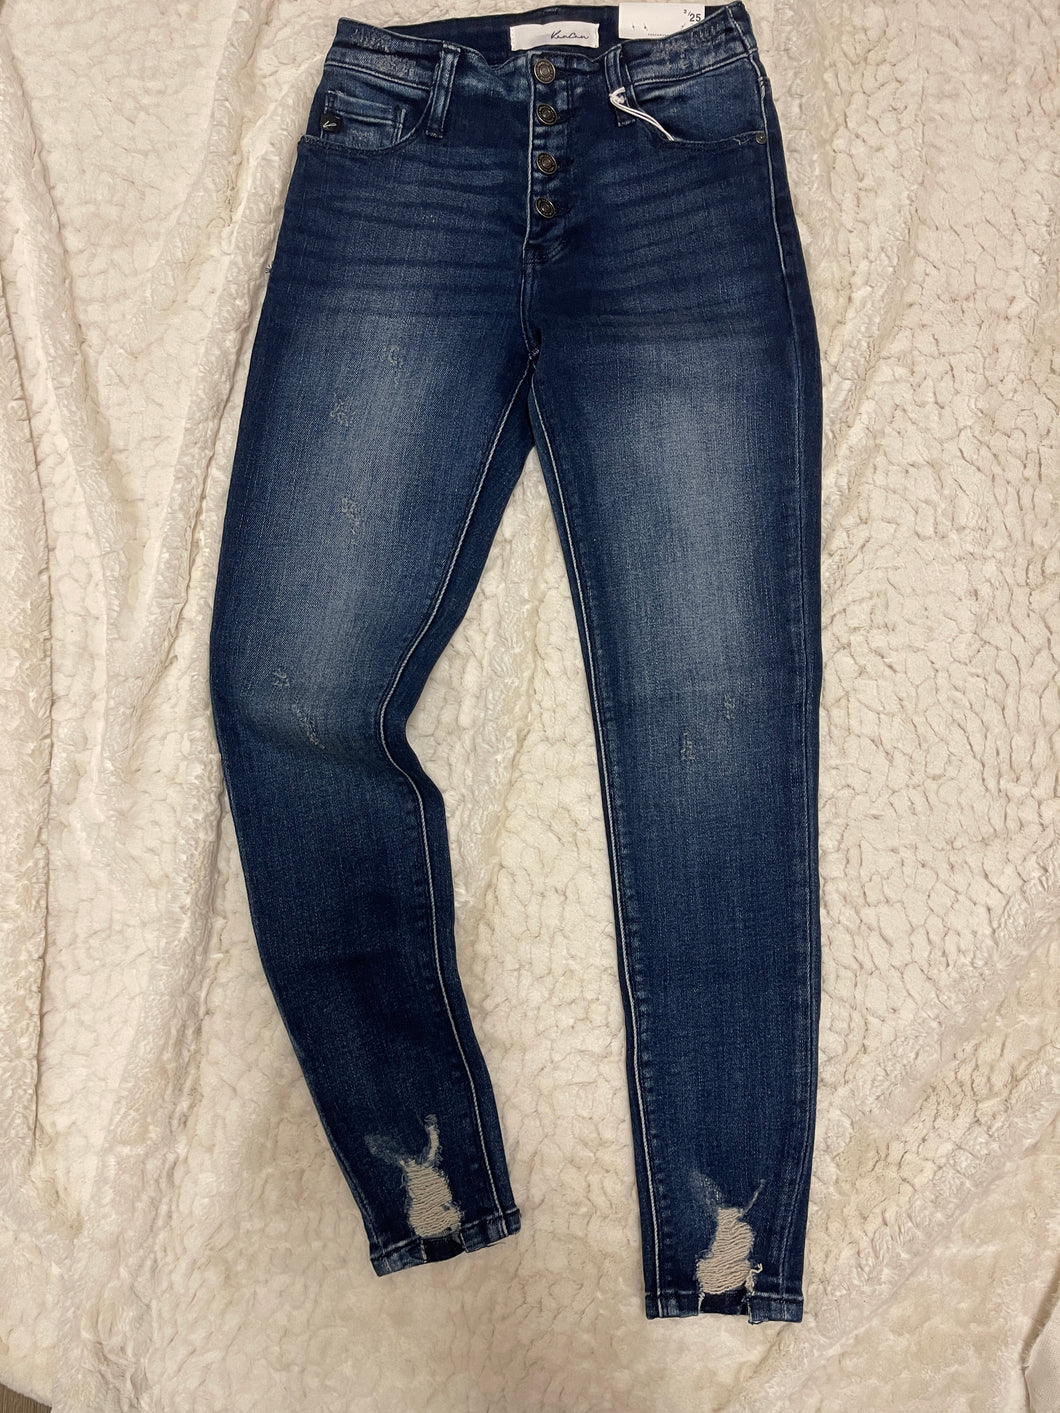 KanCan HR Super Skinny with distressing